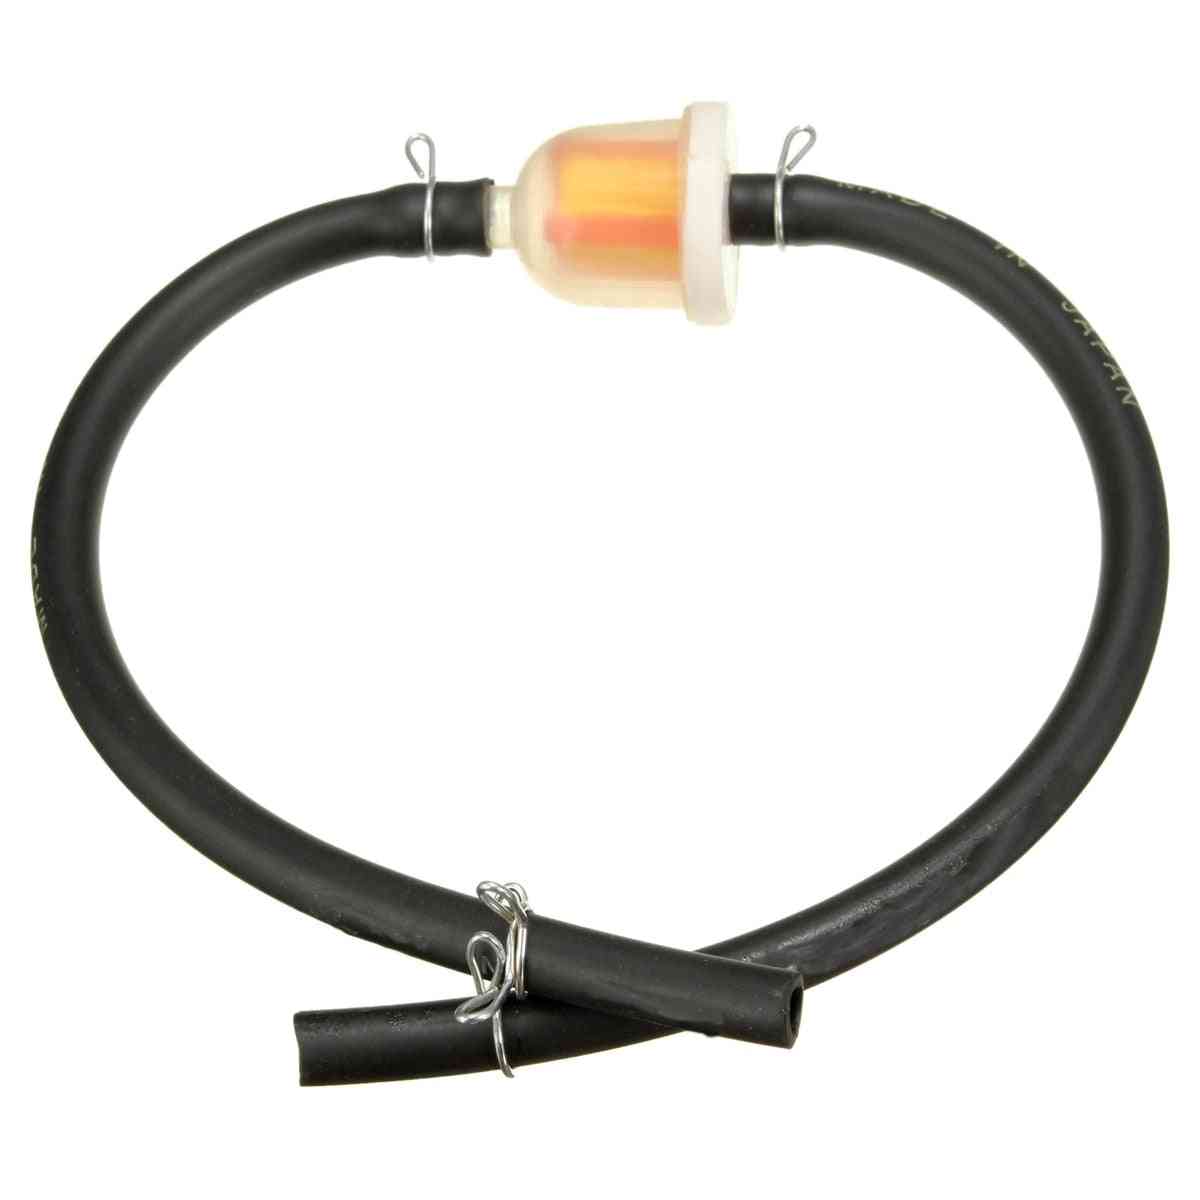 Petrol Inline Filter Hose Pipe With Clips For 2 Stroke Mini Moto Dirt Bike